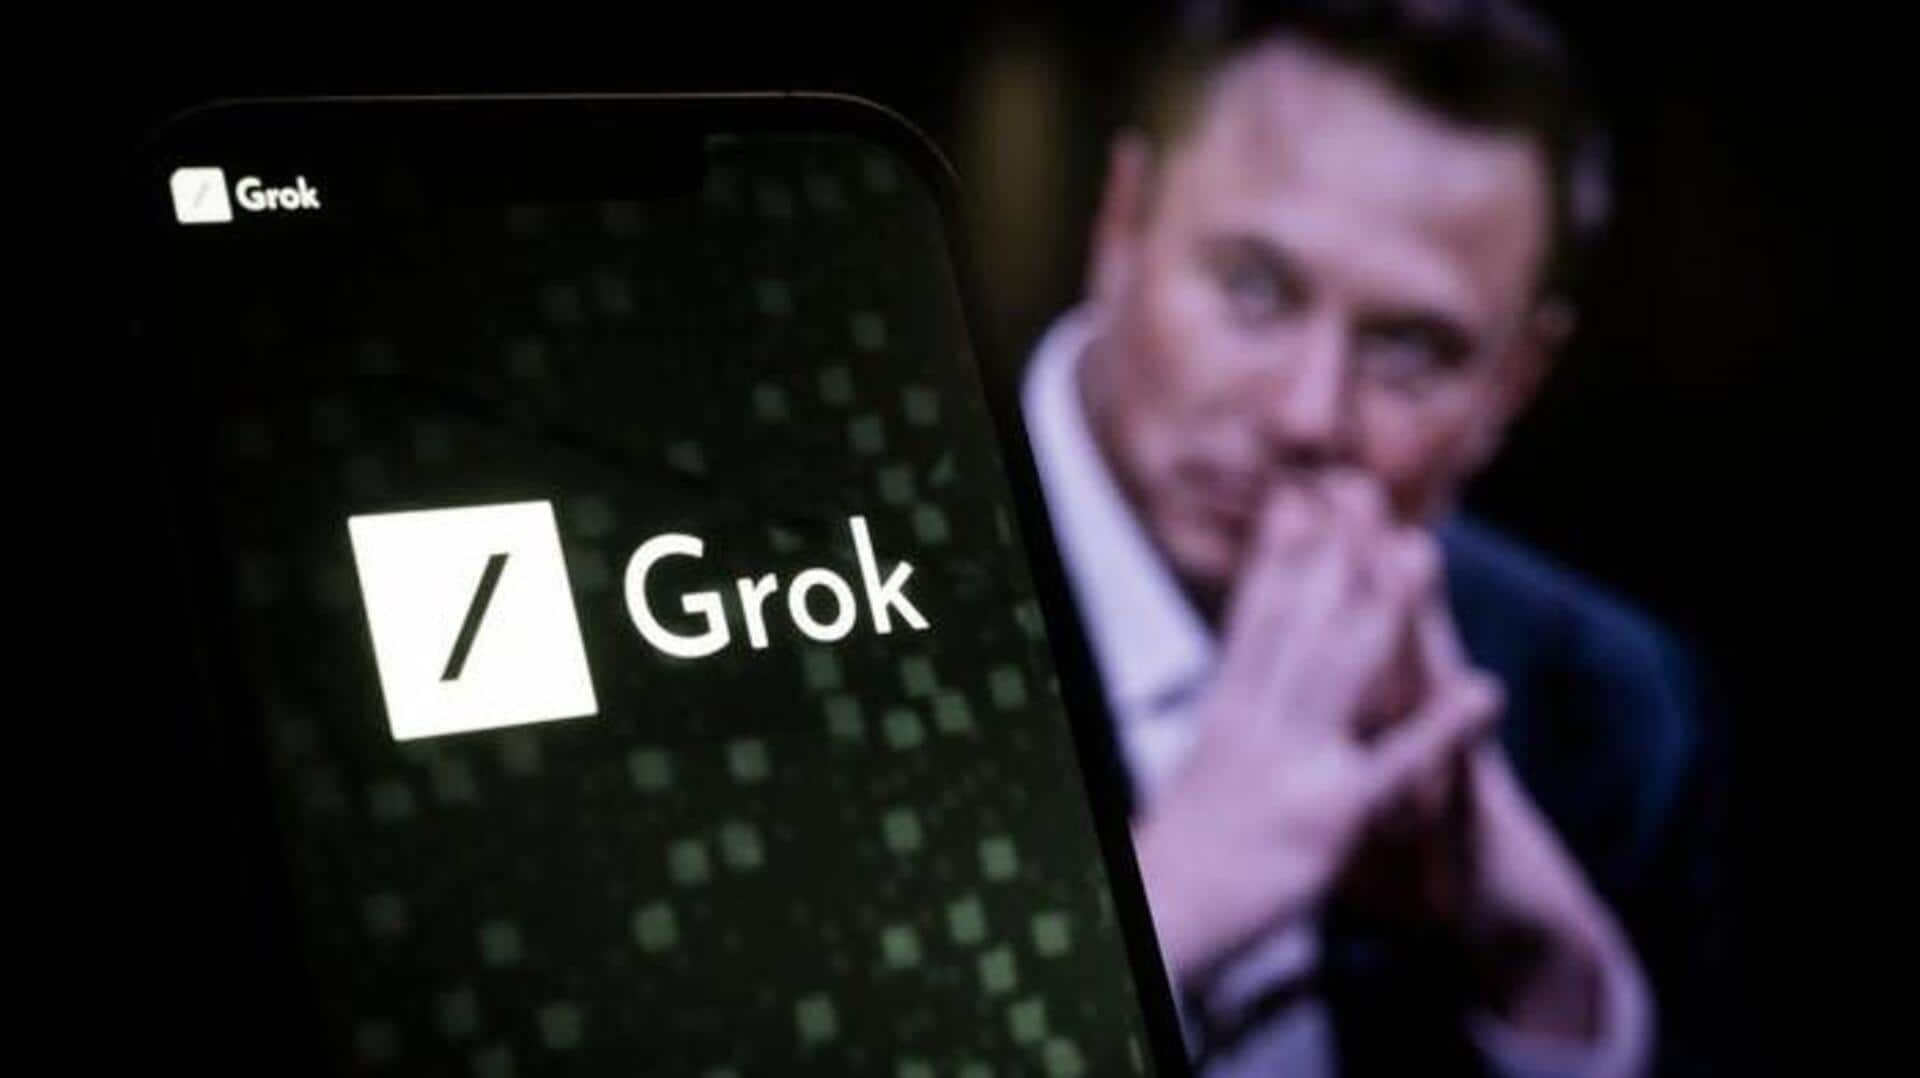 Musk's own AI chatbot Grok goes 'woke' and roasts him